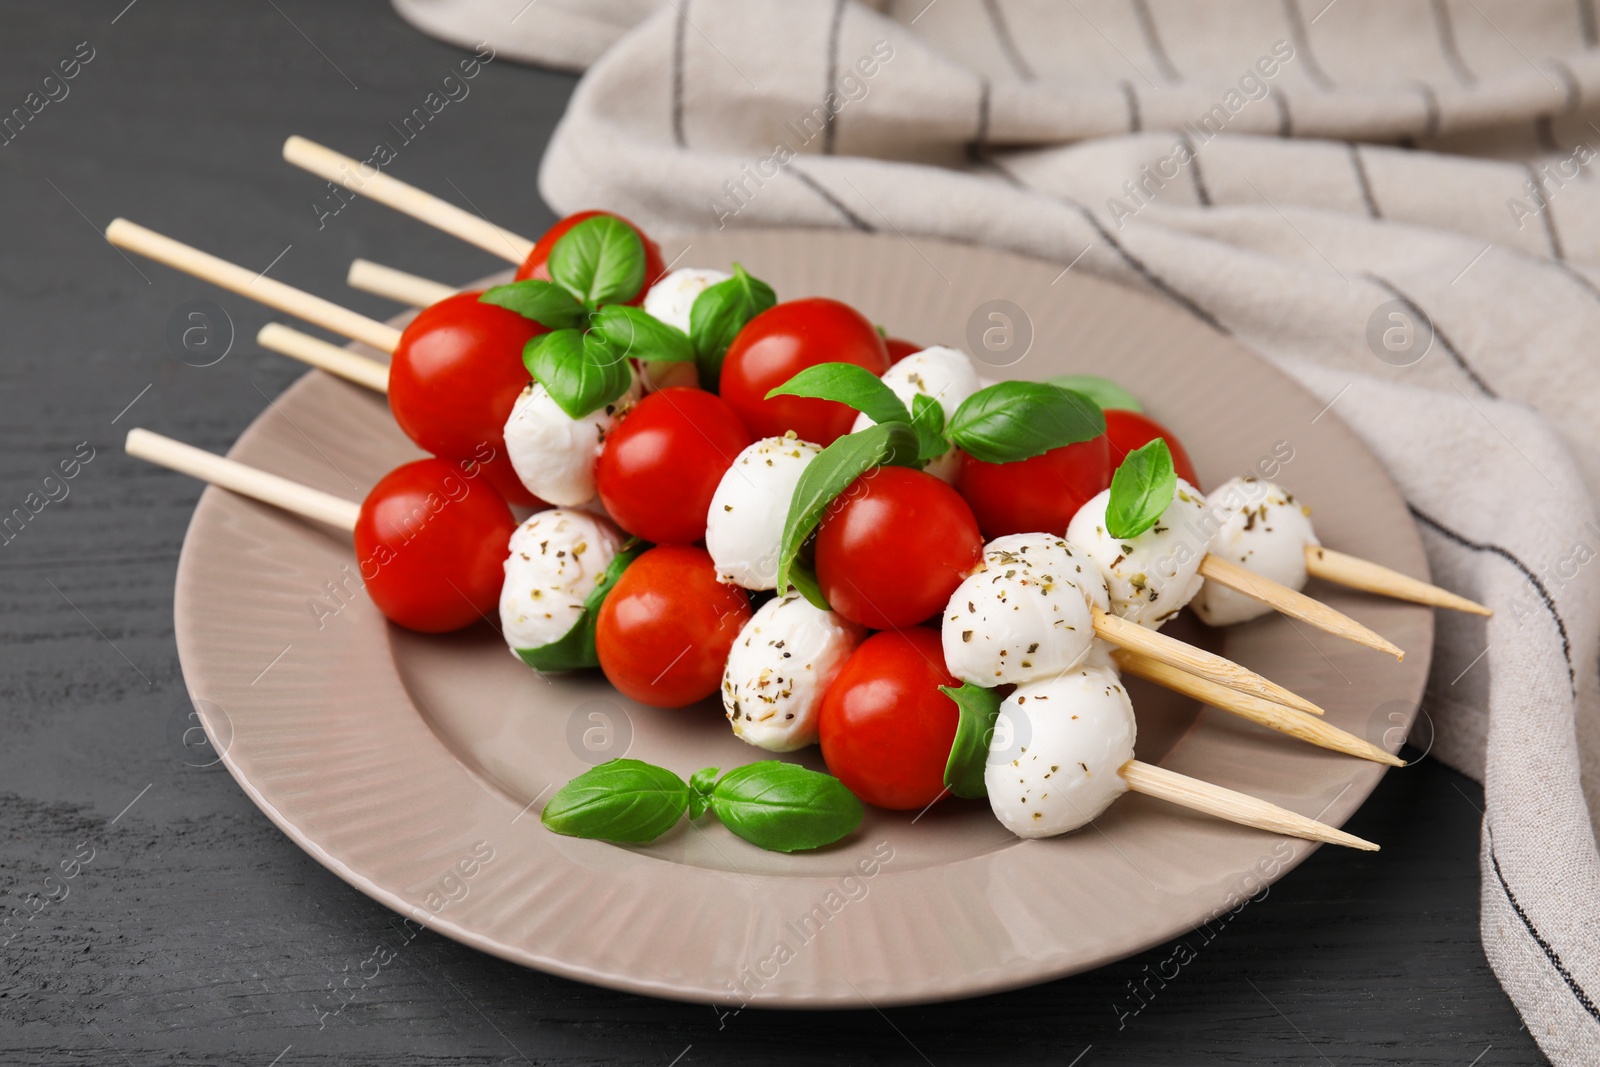 Photo of Caprese skewers with tomatoes, mozzarella balls, basil and spices on grey wooden table, closeup